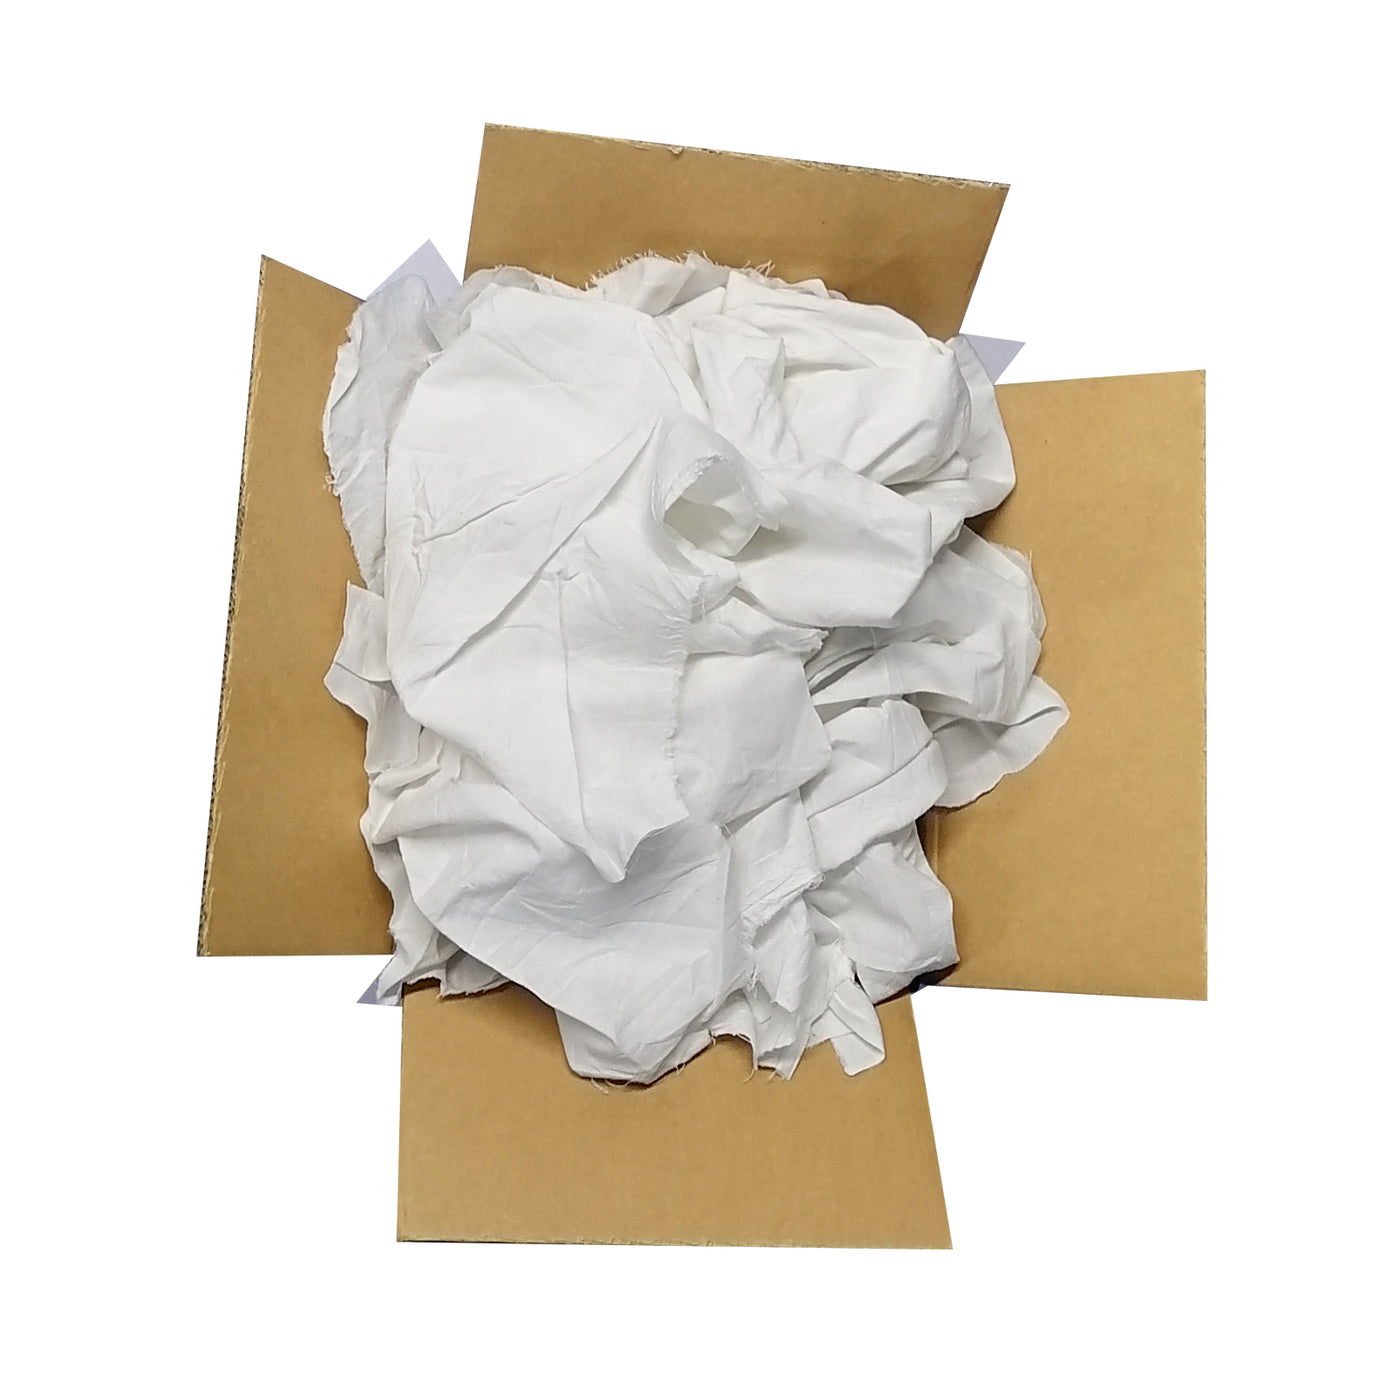 White Cotton Recycled Sheeting Rags Wiping Rags - 25 lbs. Box - Multip